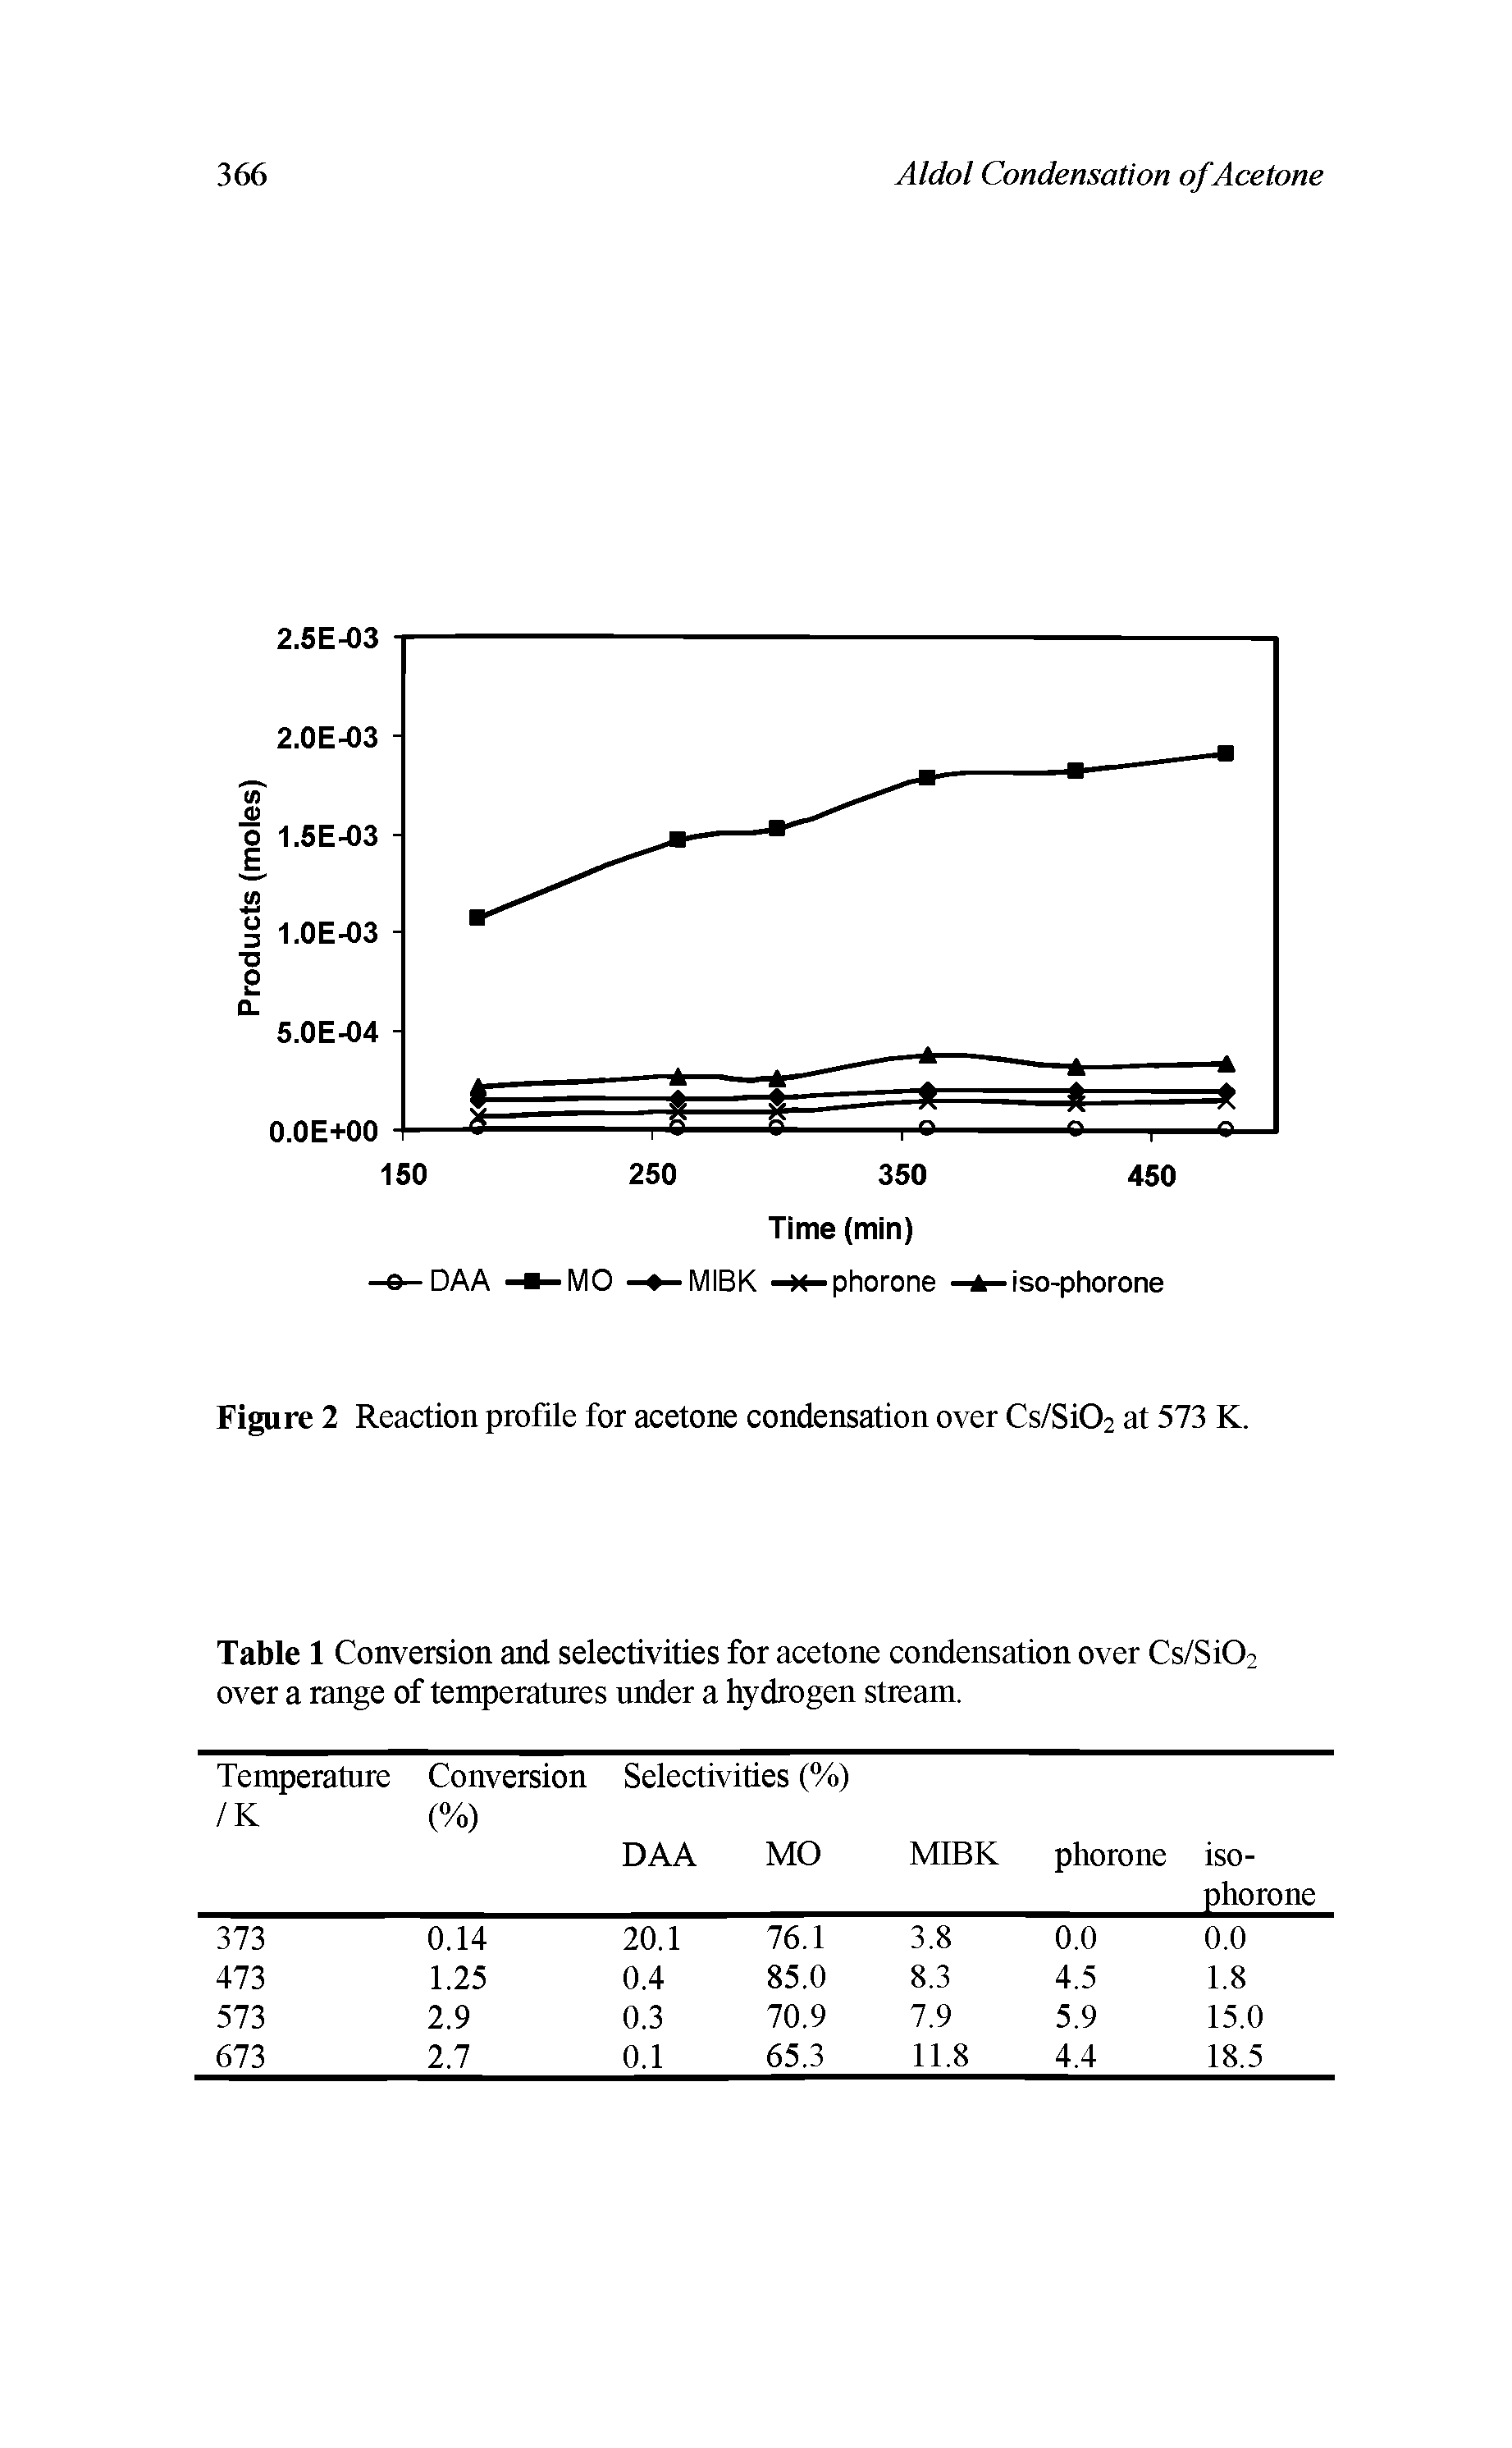 Figure 2 Reaction profile for acetone condensation over Cs/Si02 at 573 K.